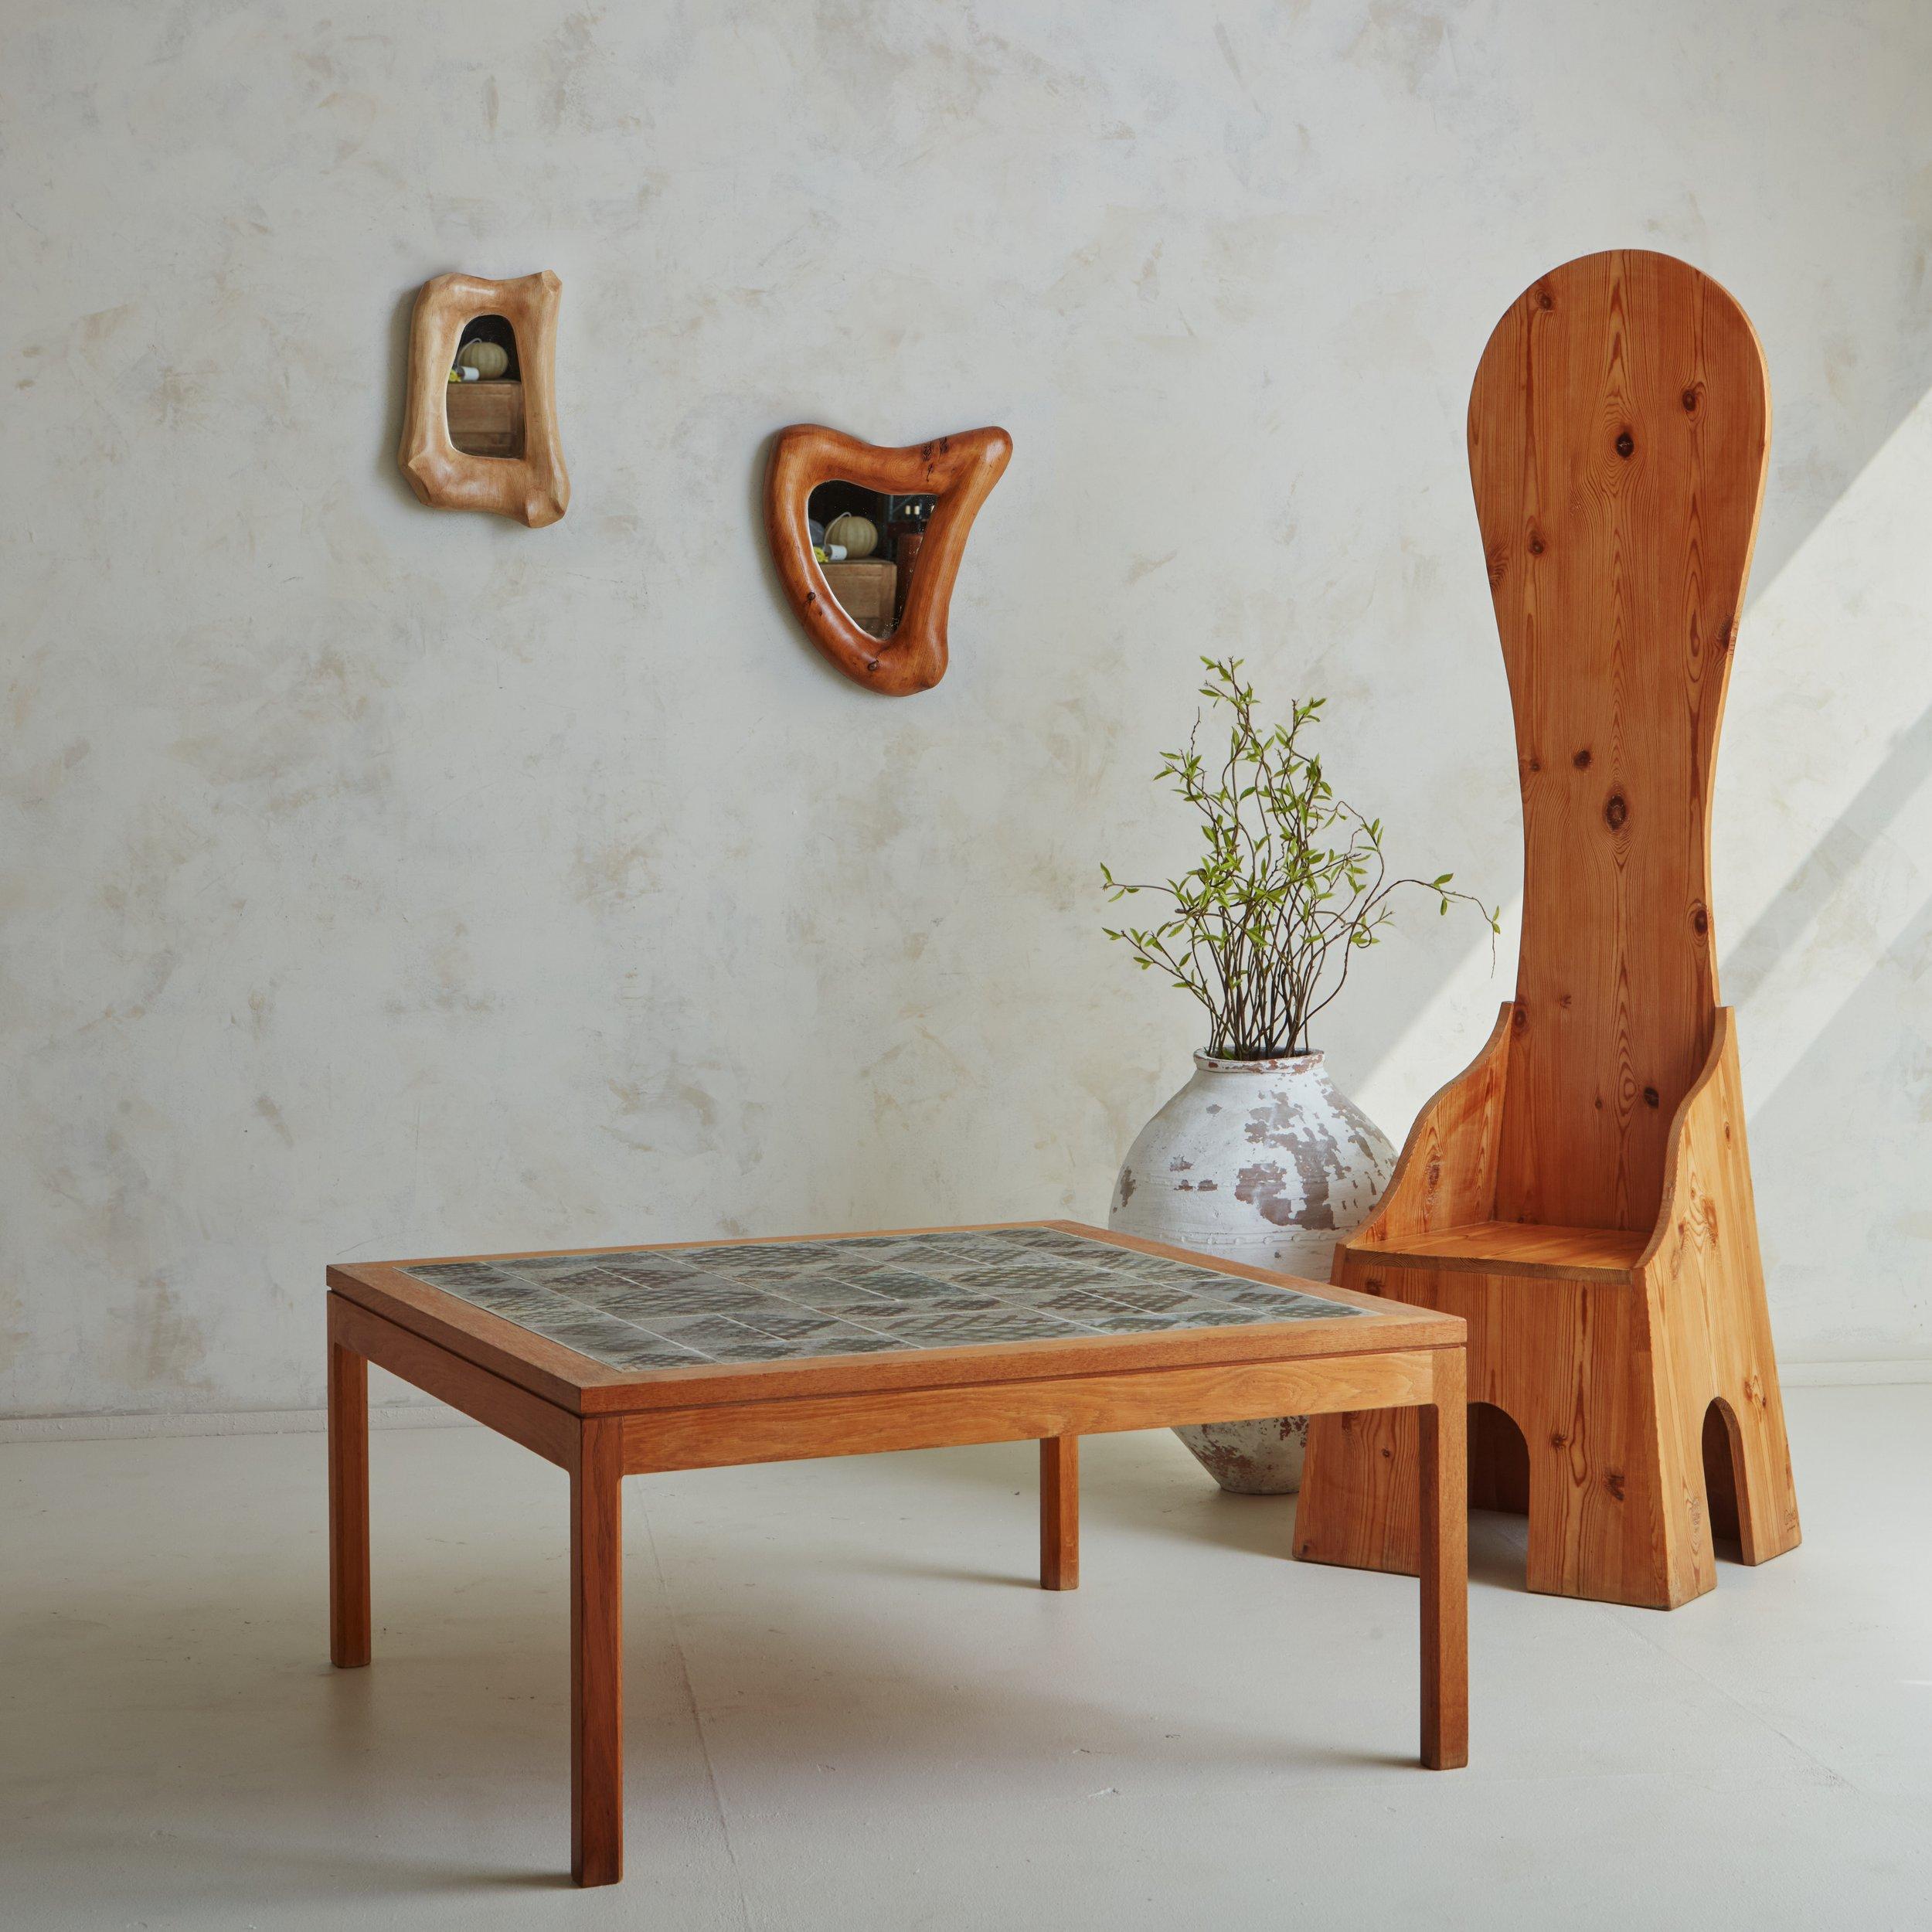 A 1970s coffee table by Danish ceramicist Tue Poulsen (b.1939). This table features a square oak wood frame with beautiful graining and block legs. It has a tile table top made from gorgeous hand painted unglazed stoneware ceramic tiles. Signed